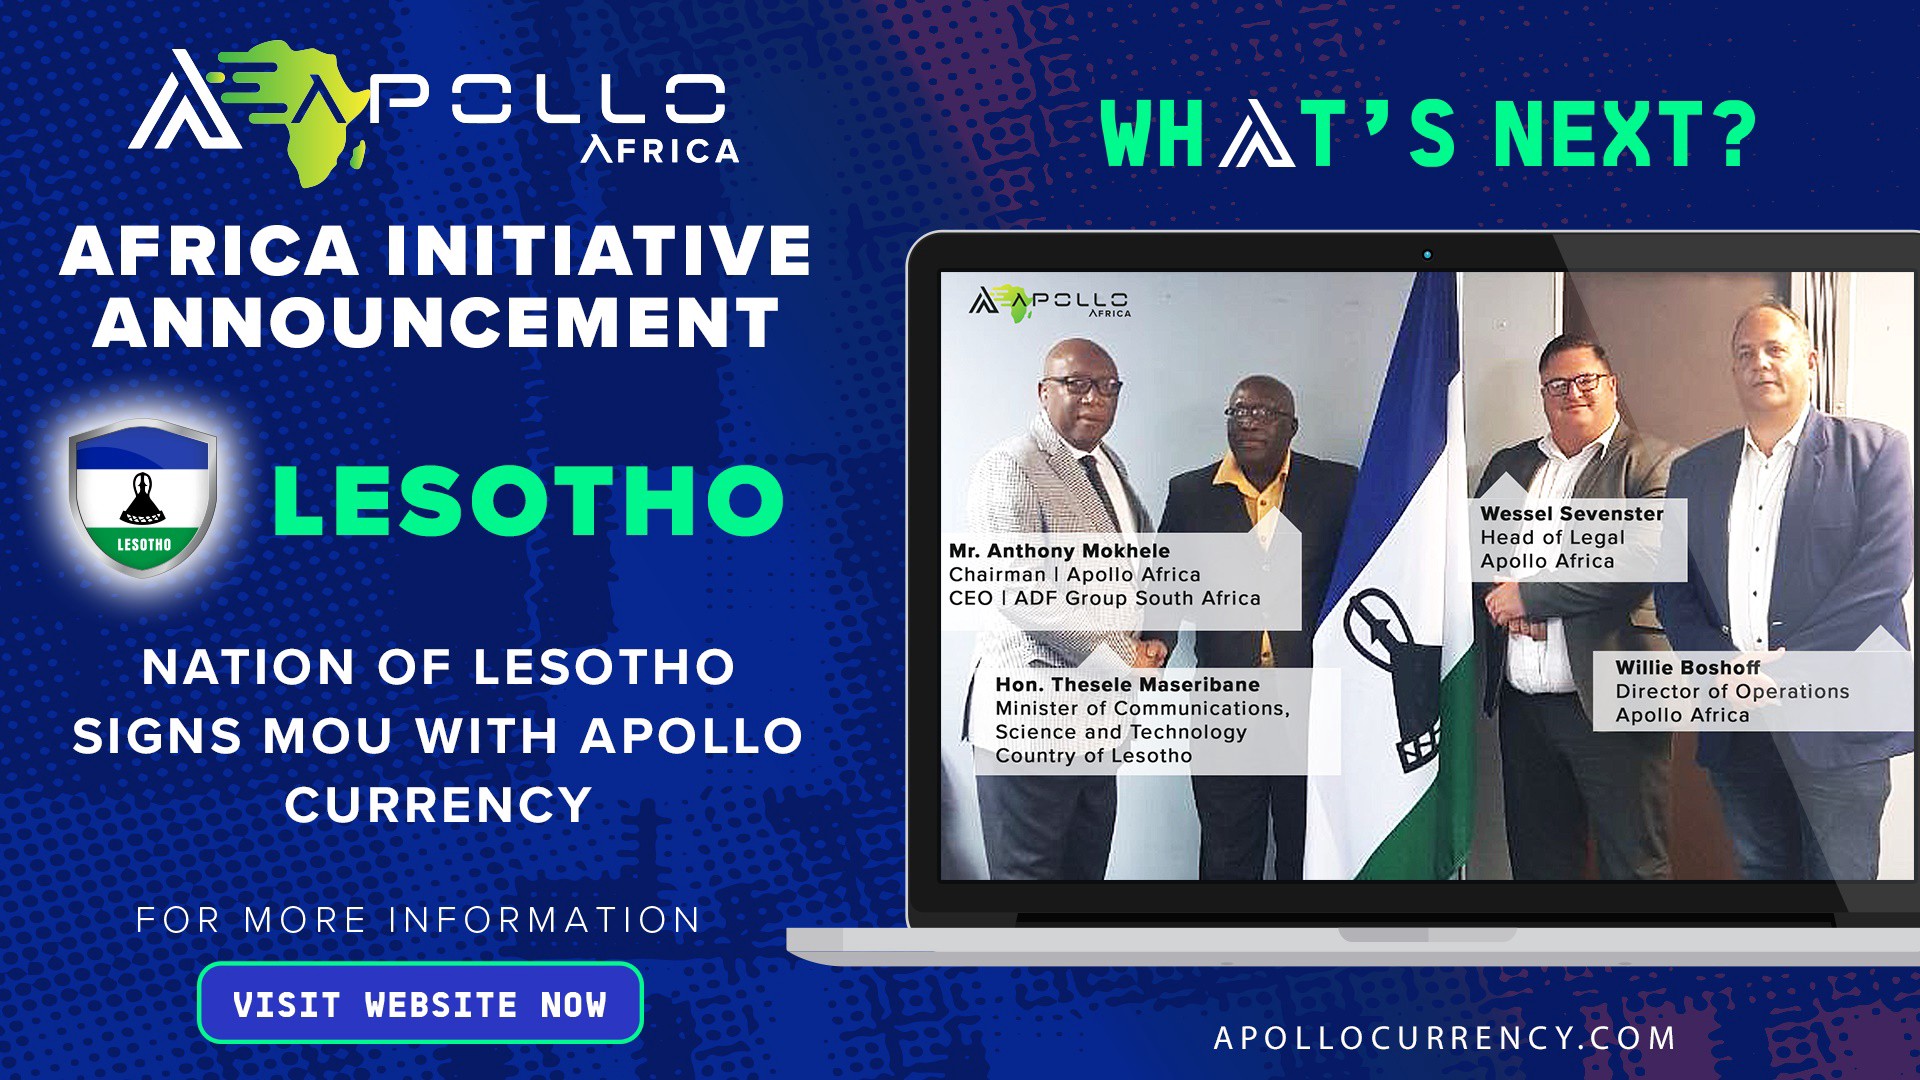 https://medium.com/@apollocurrency/nation-of-lesotho-signs-mou-with-apollo-currency-3a49c9911e20